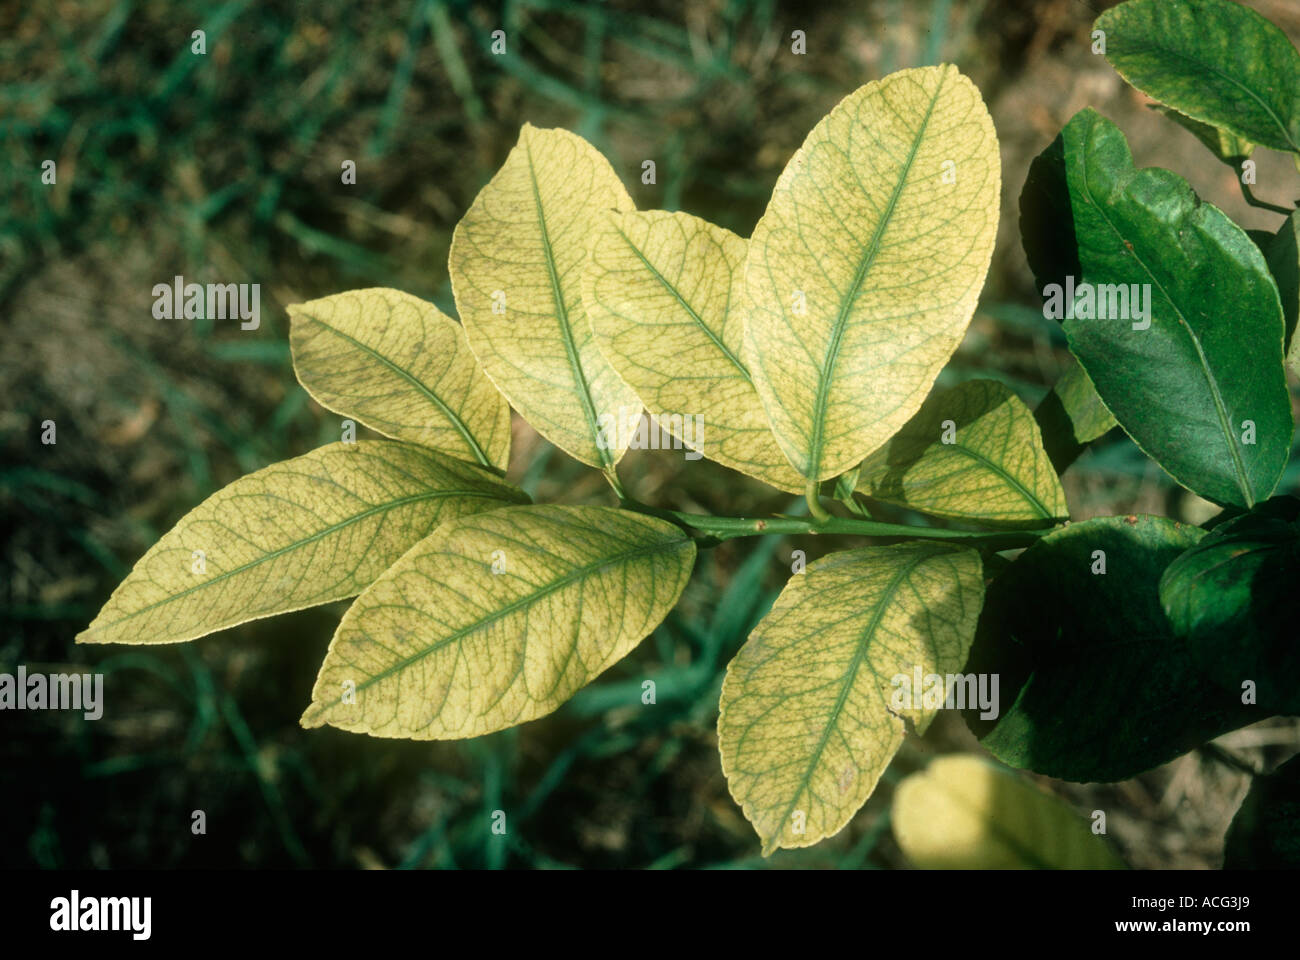 Iron deficiency citrus leaves with severe interveinal chlorosis ...